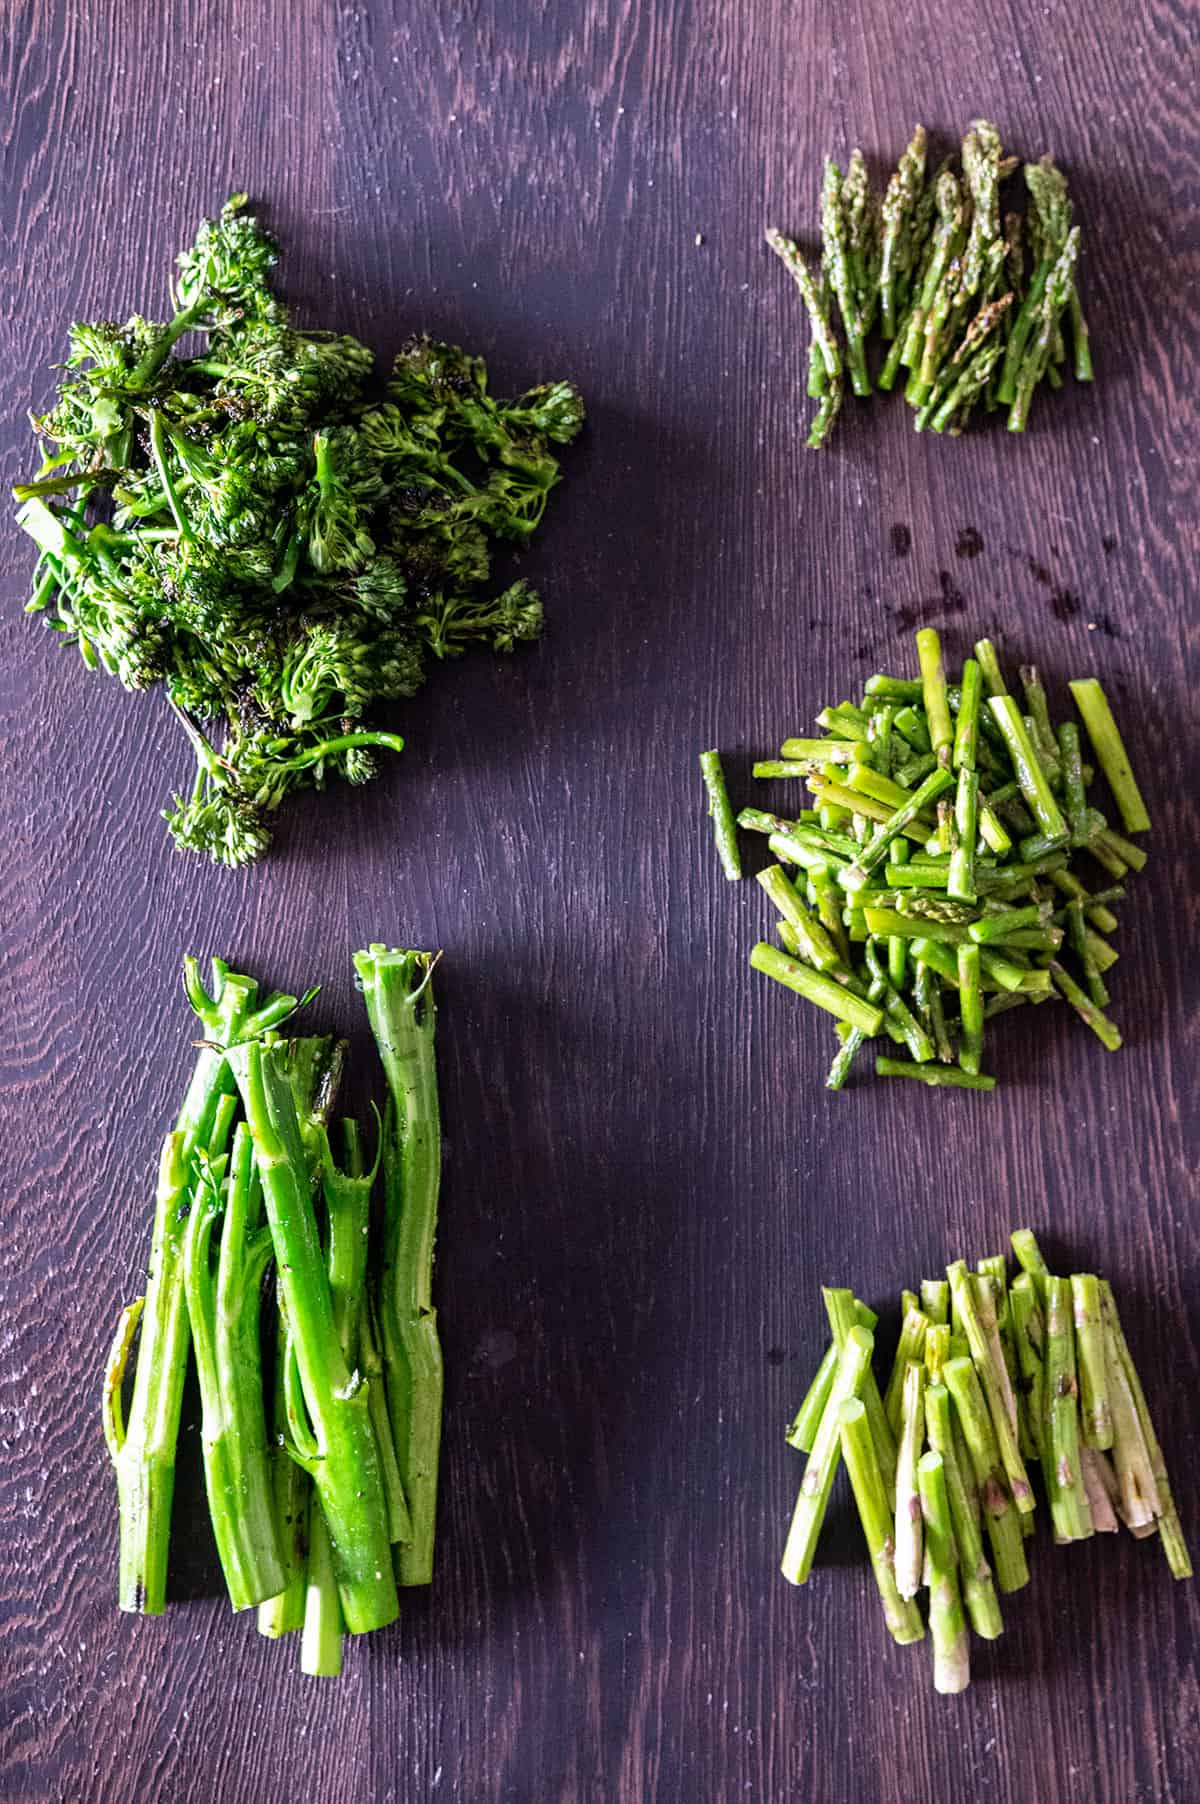 florets removed from broccolini and asparagus sliced with woody stems removed.